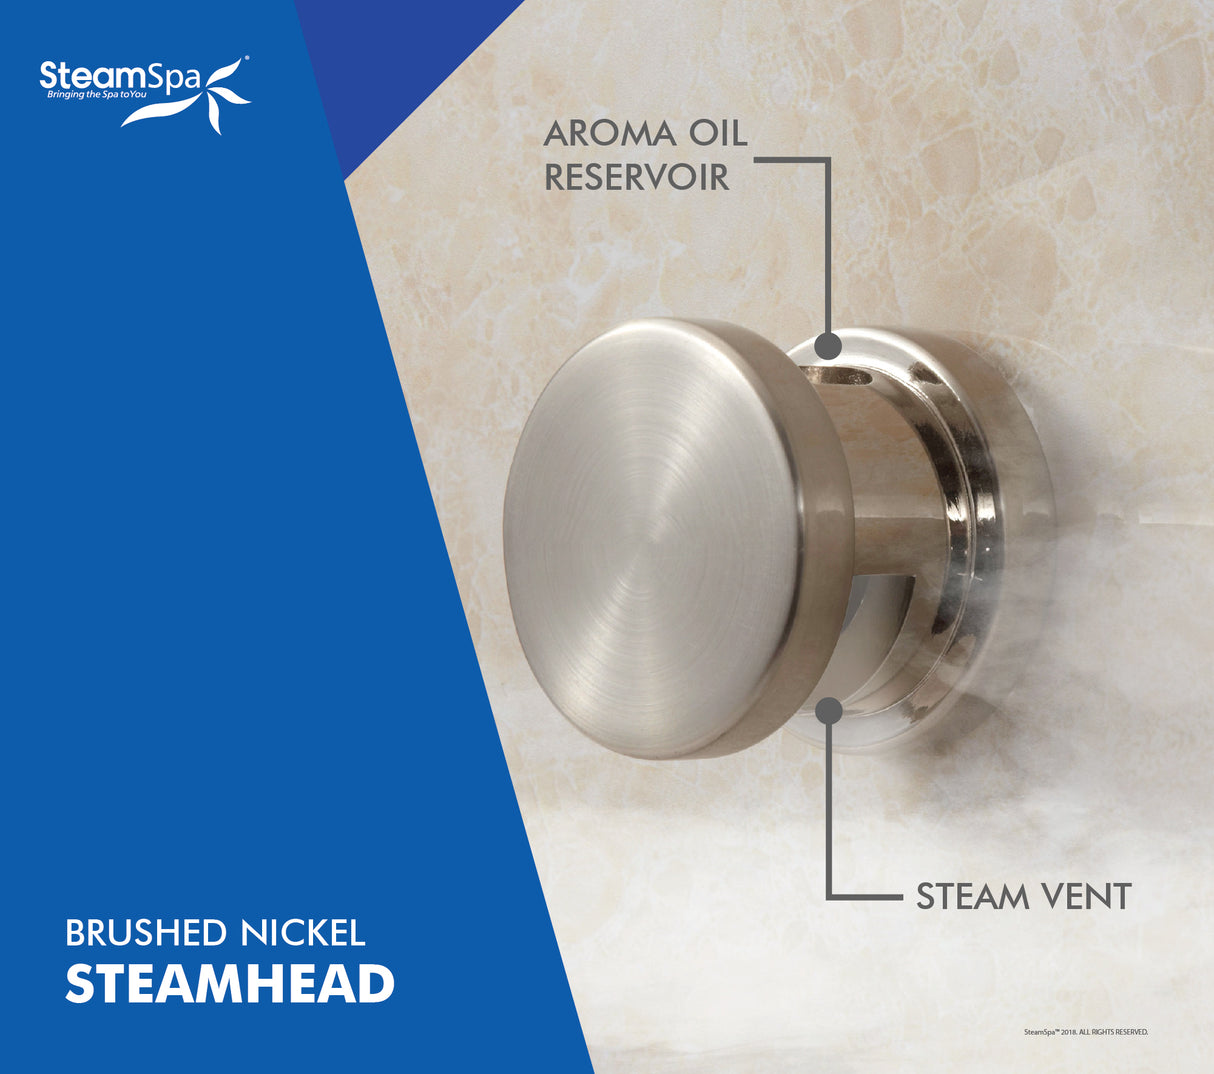 SteamSpa Oasis 7.5 KW QuickStart Acu-Steam Bath Generator Package with Built-in Auto Drain in Brushed Nickel OA750BN-A